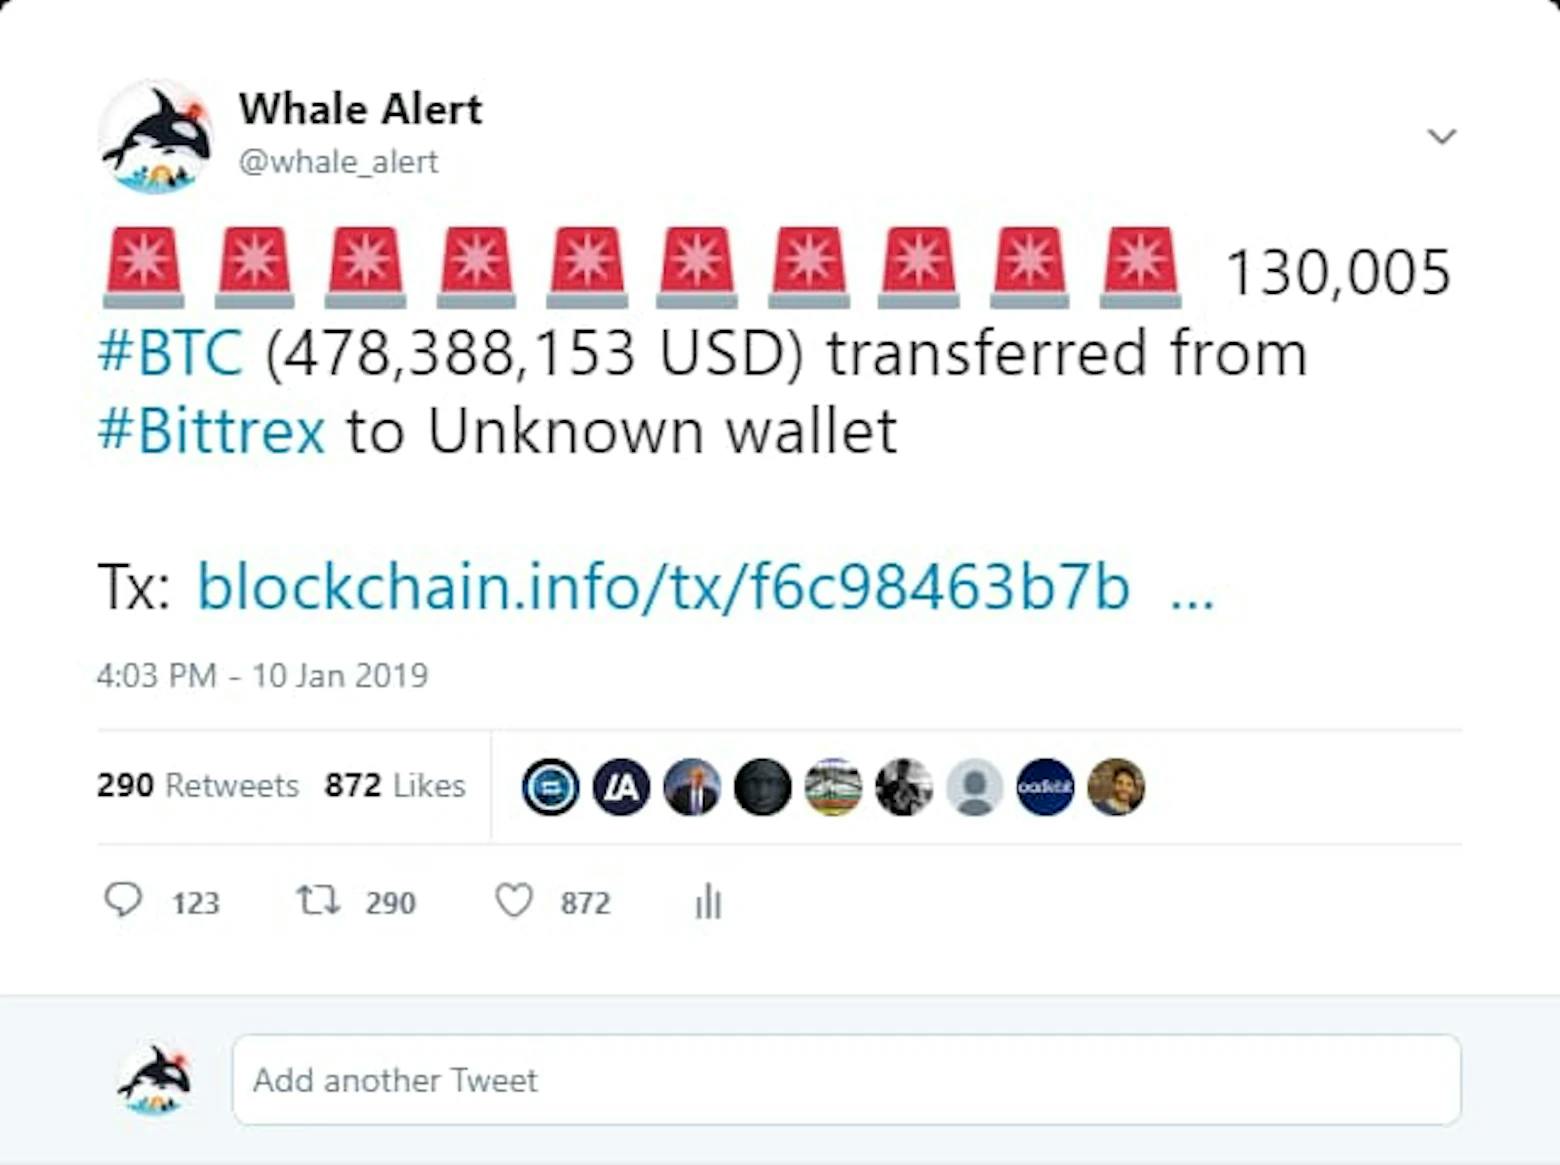 Watch those whale movements!